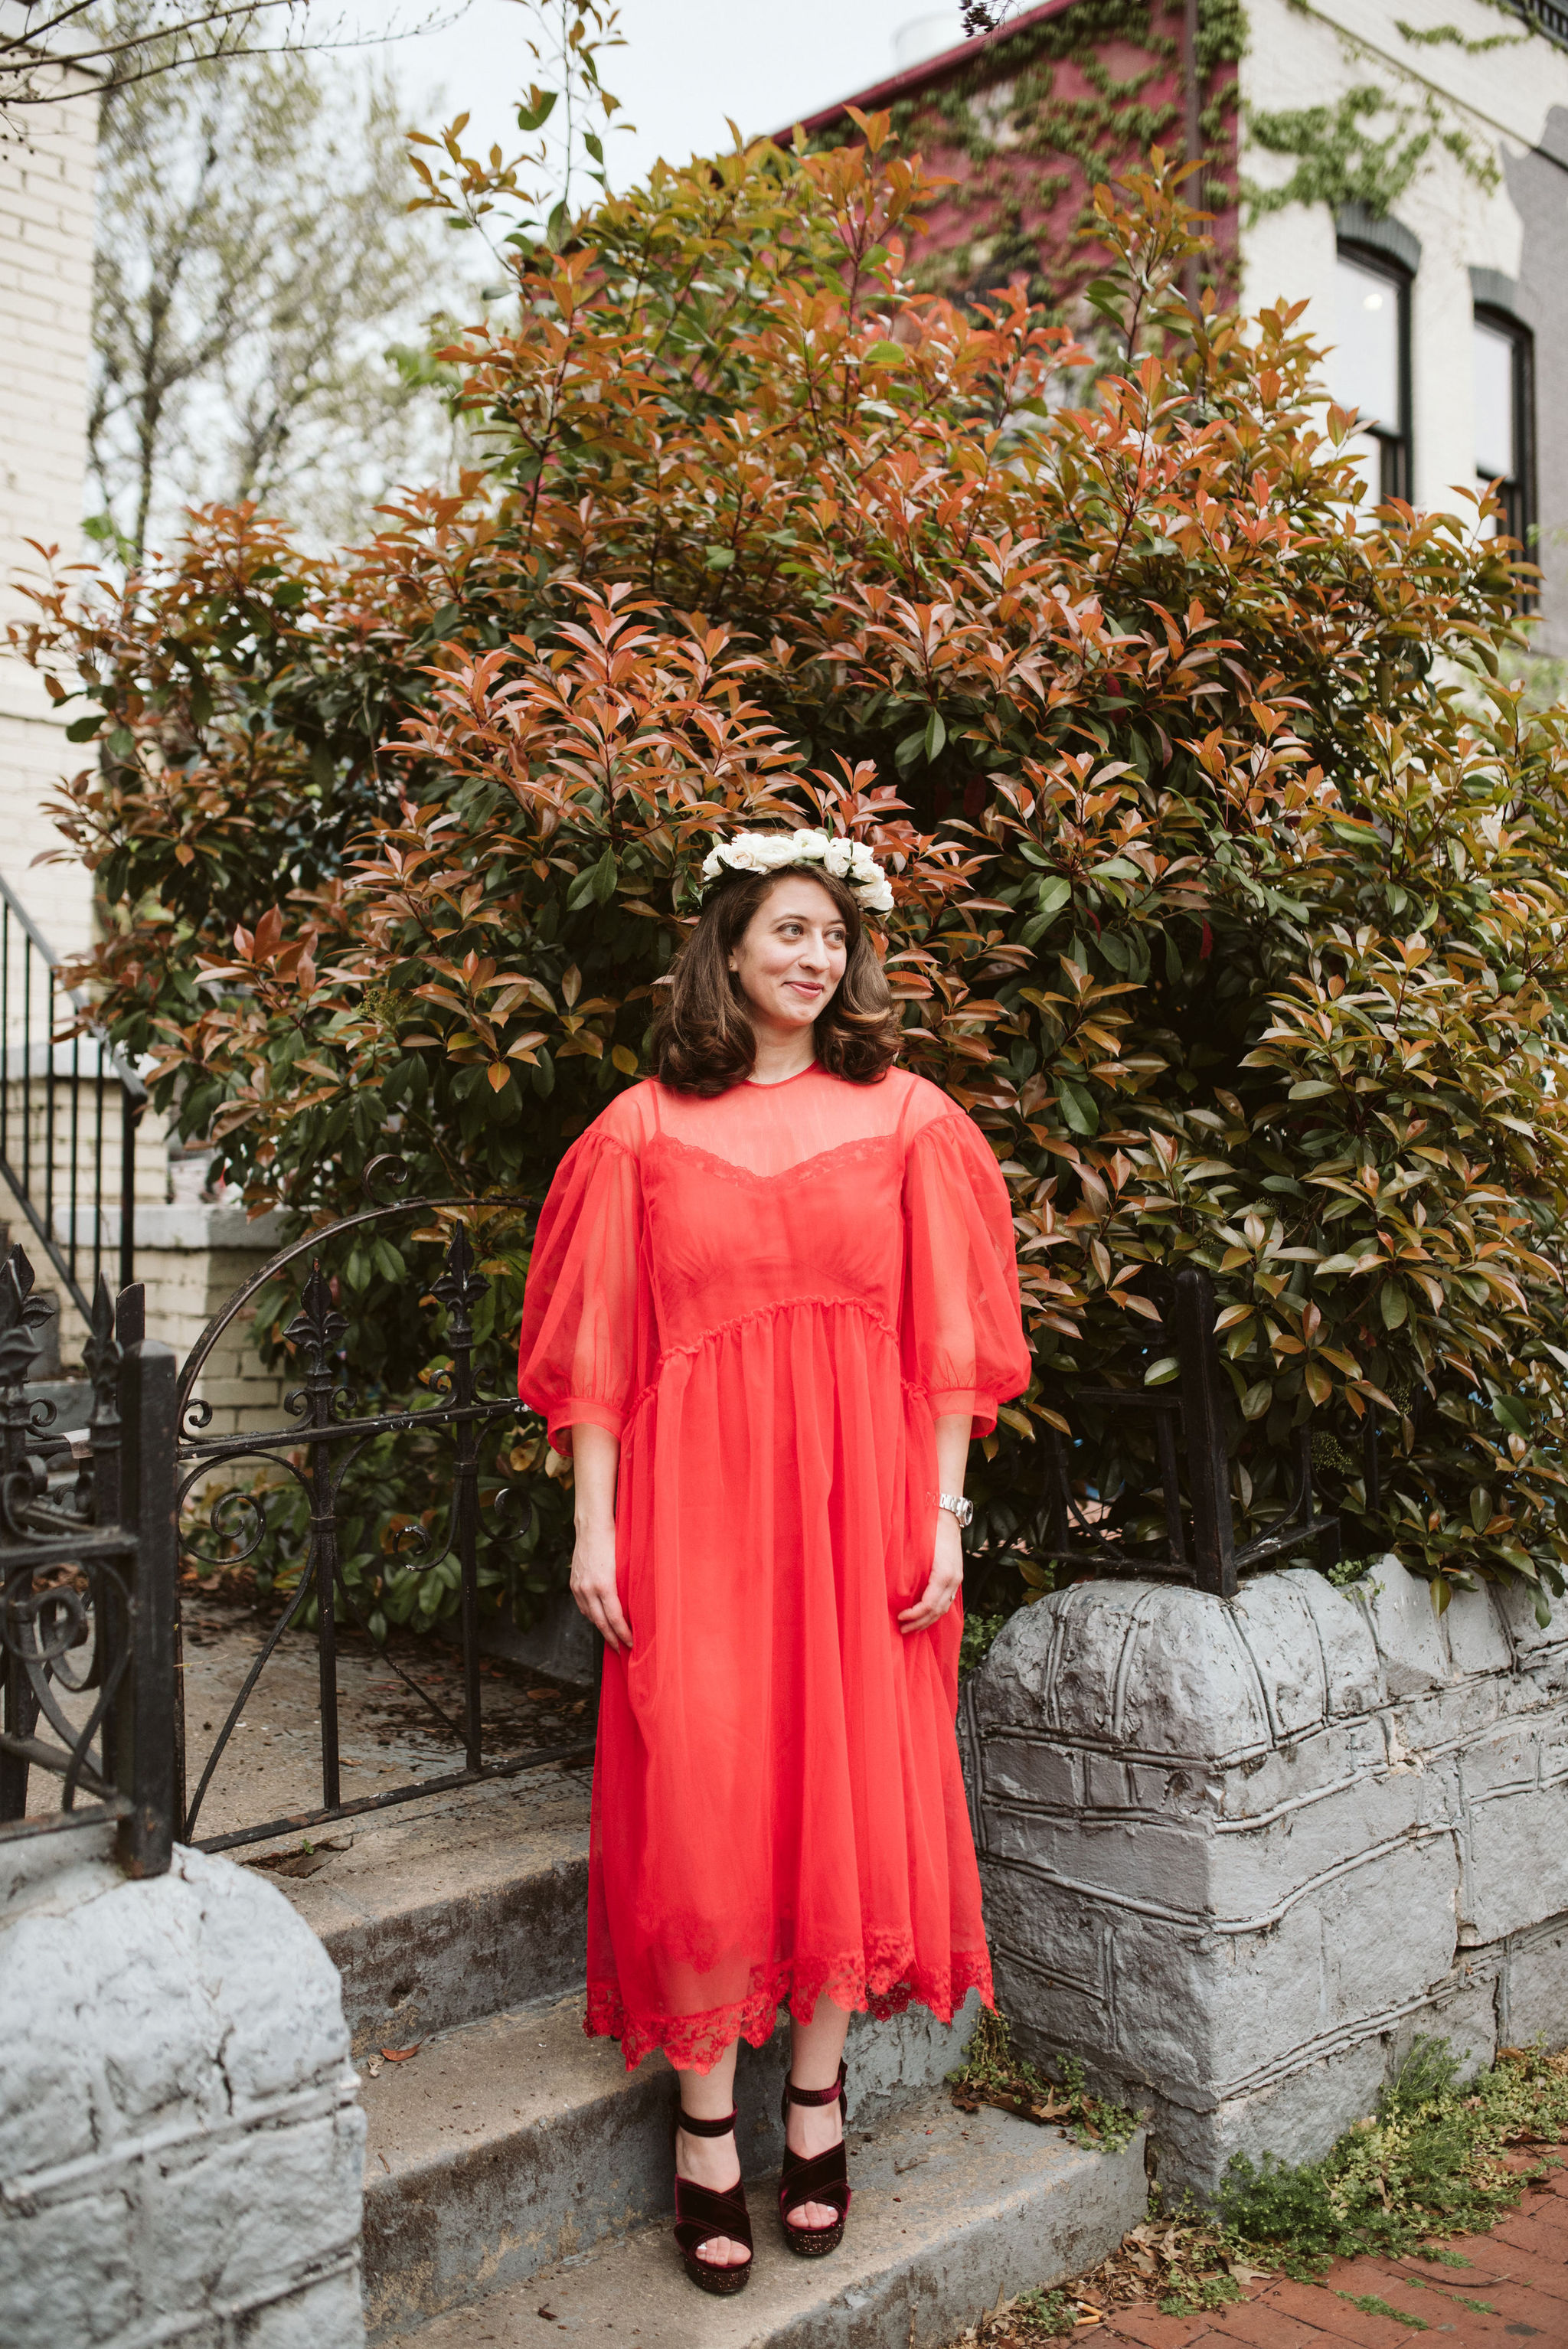  Washington DC, Baltimore Wedding Photographer, Intimate Wedding, Traditional, Classic, Palestinian, Portrait of Bride in front of Foliage, Flower Crown, Red Dress 